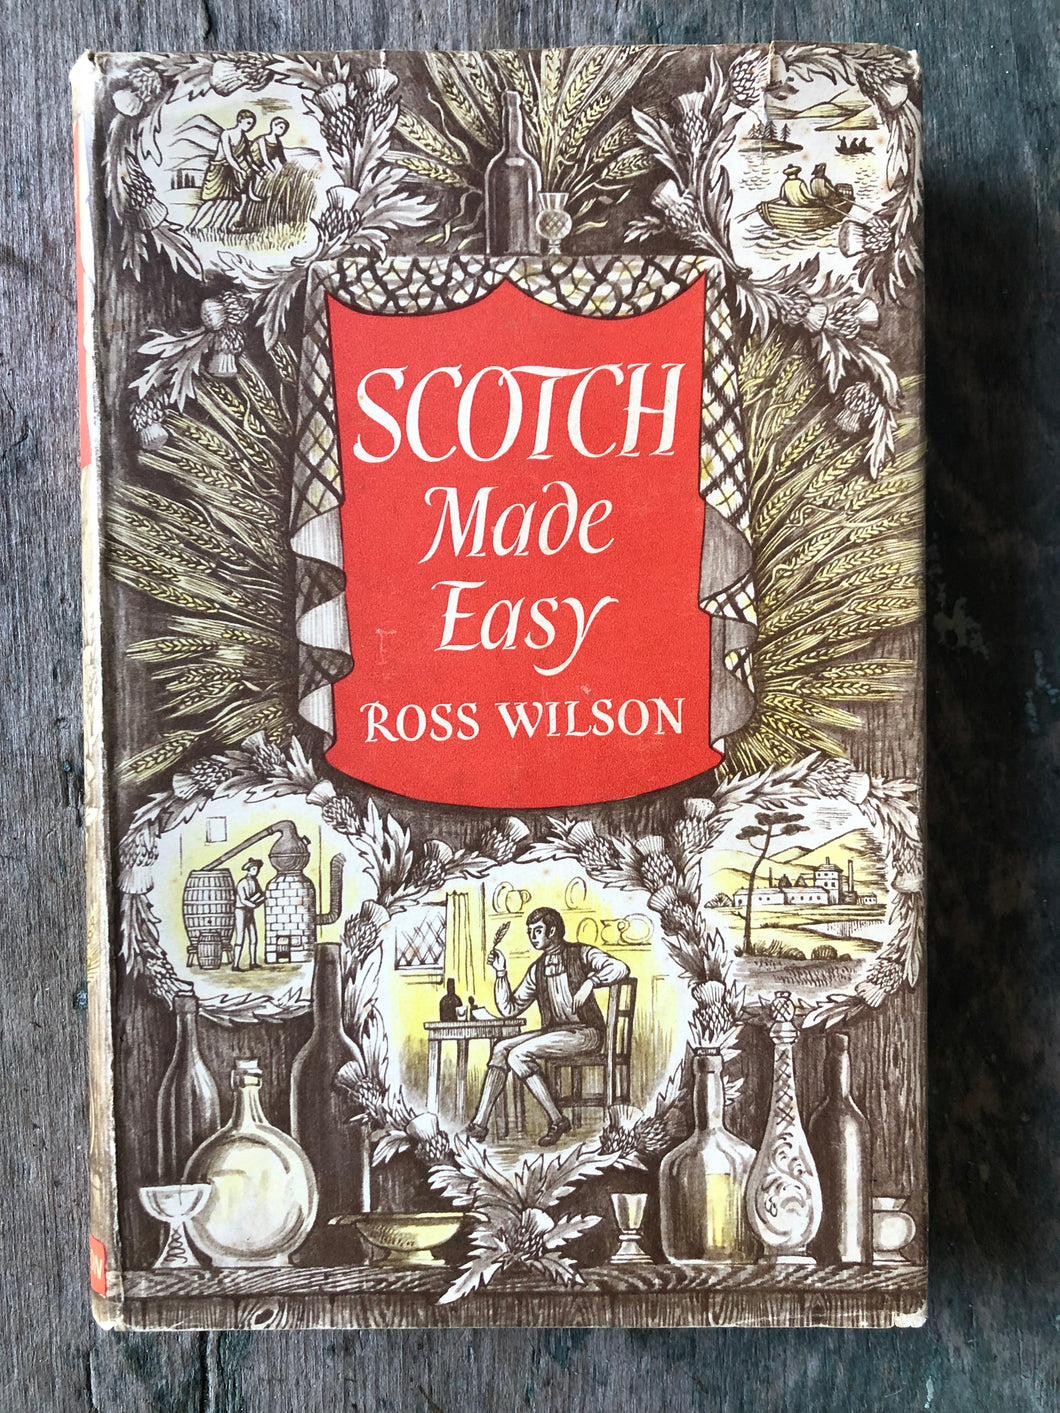 Scotch Made Easy. by Ross Wilson